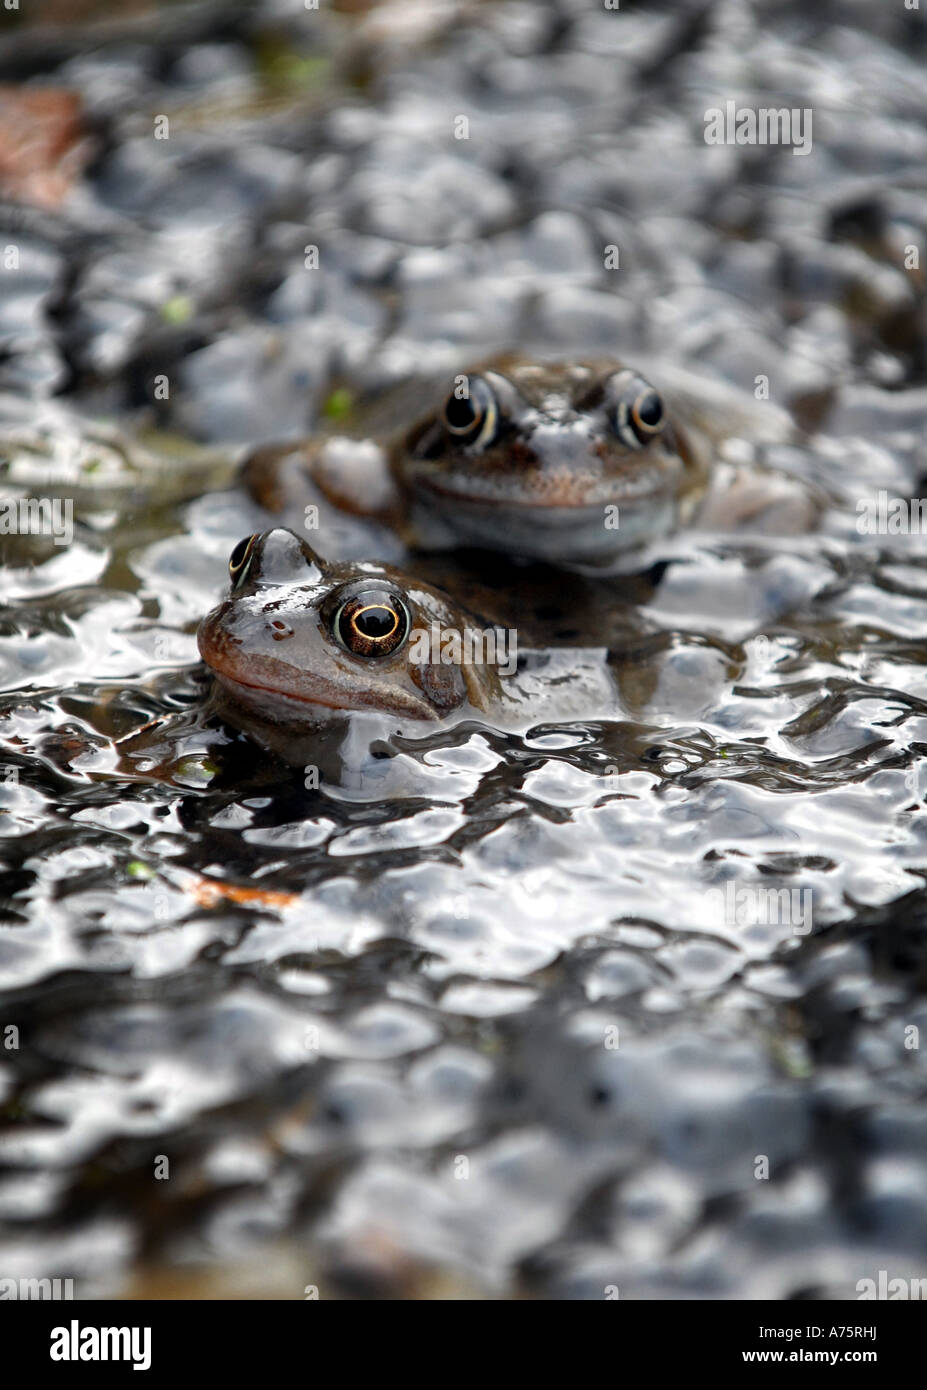 BRITISH MATING FROGS IN FROGSPAWN RE SPRINGTIME SPRING WILDLIFE ANIMALS MATING TADPOLES GARDEN POND WEATHER CLIMATE WARM UK Stock Photo